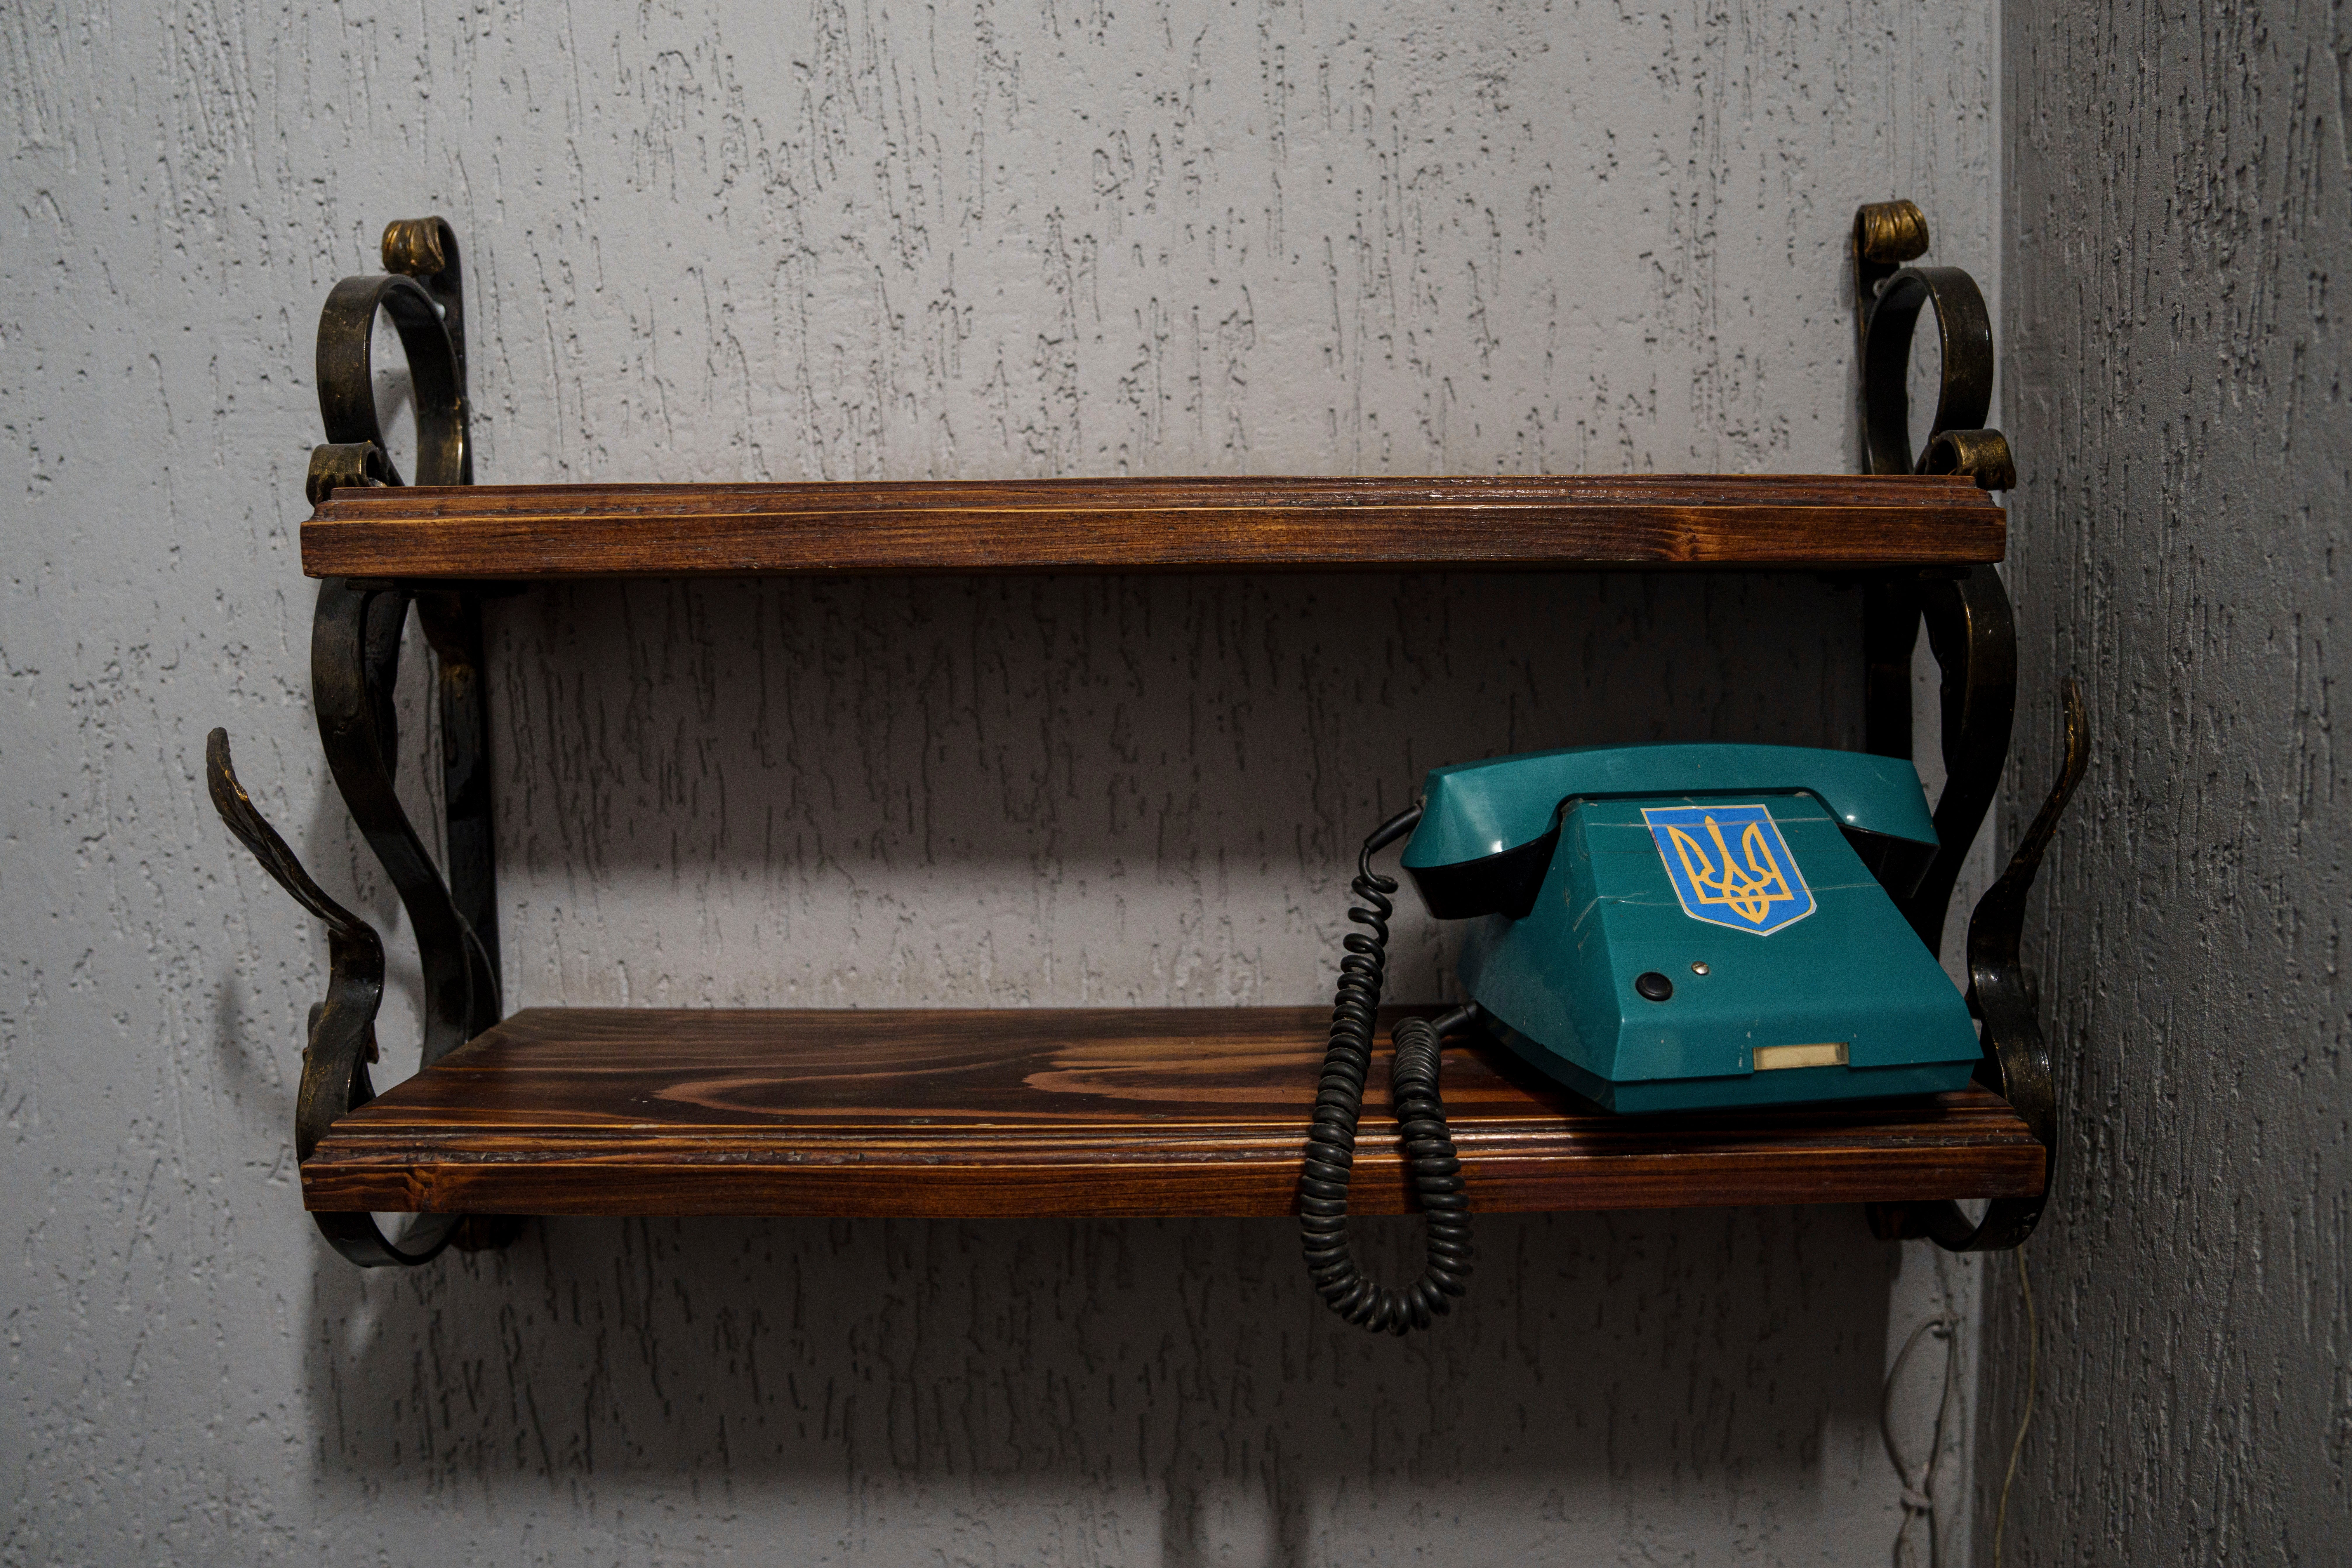 A telephone with a trident, Ukraine’s national symbol, is seen at the prisoner of war detention center in Ukraine